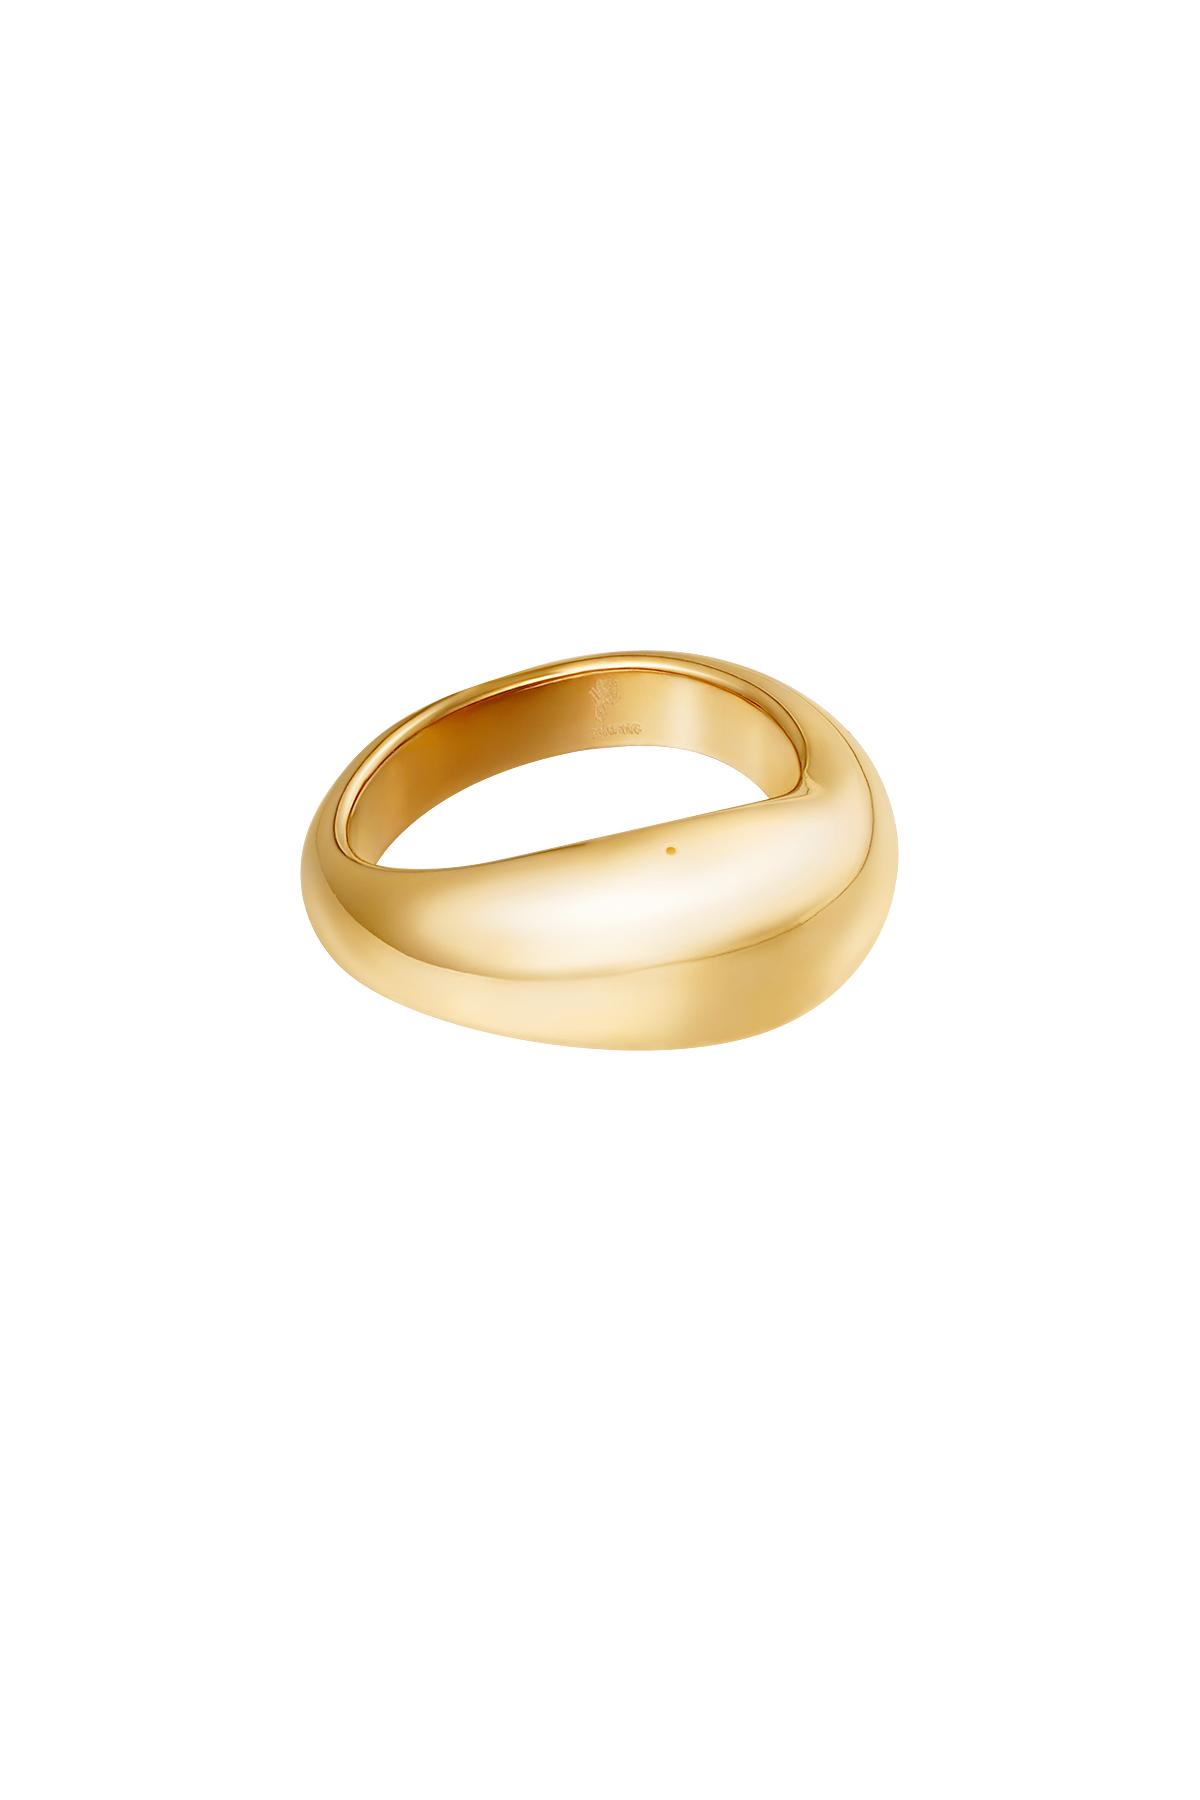 Gold / 18 / Anello liscio Gold Stainless Steel 18 Immagine2